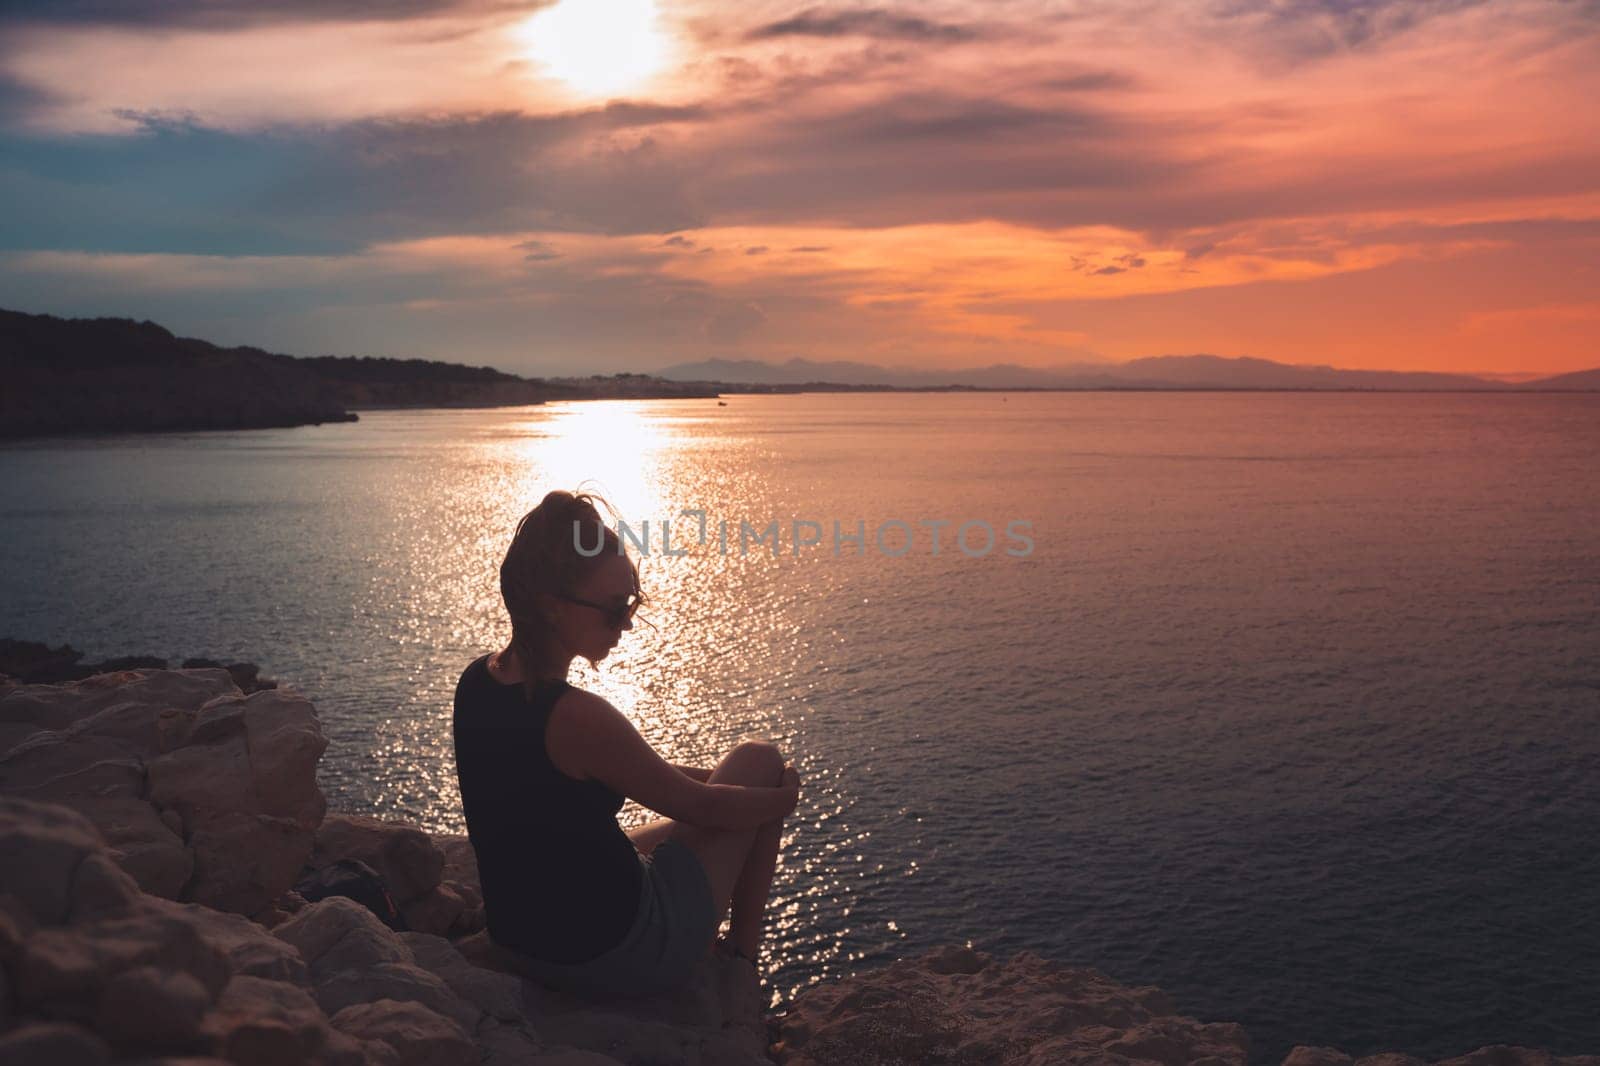 Silhouette of a girl standing on the beach enjoy freedom at the beach at sunset. Vacation concept. by PaulCarr